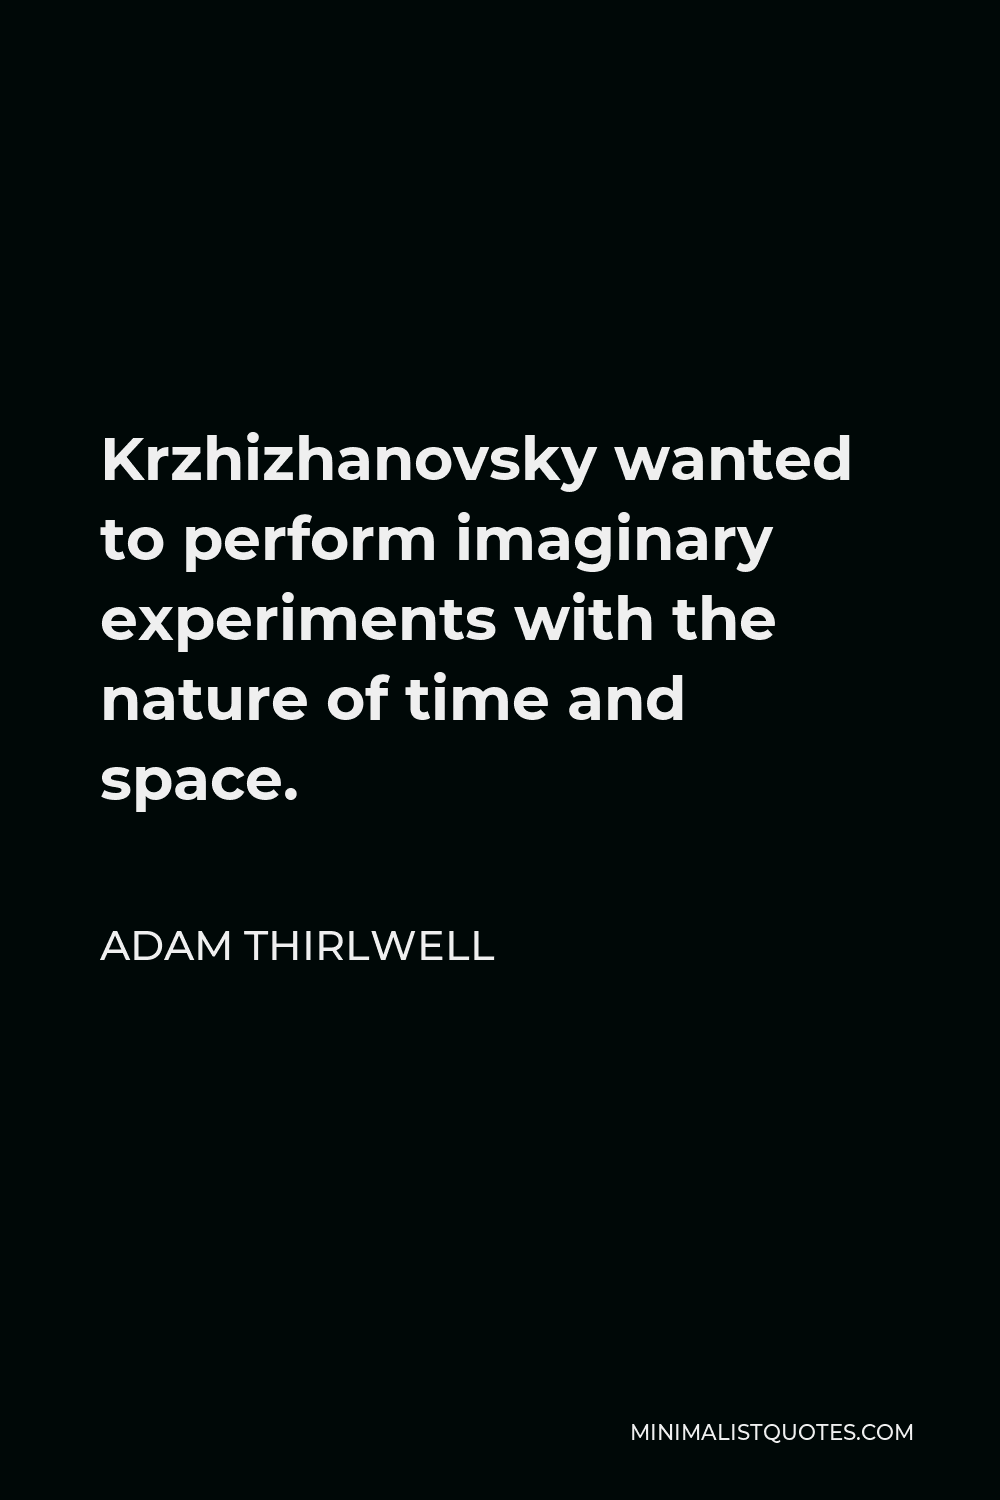 Adam Thirlwell Quote - Krzhizhanovsky wanted to perform imaginary experiments with the nature of time and space.